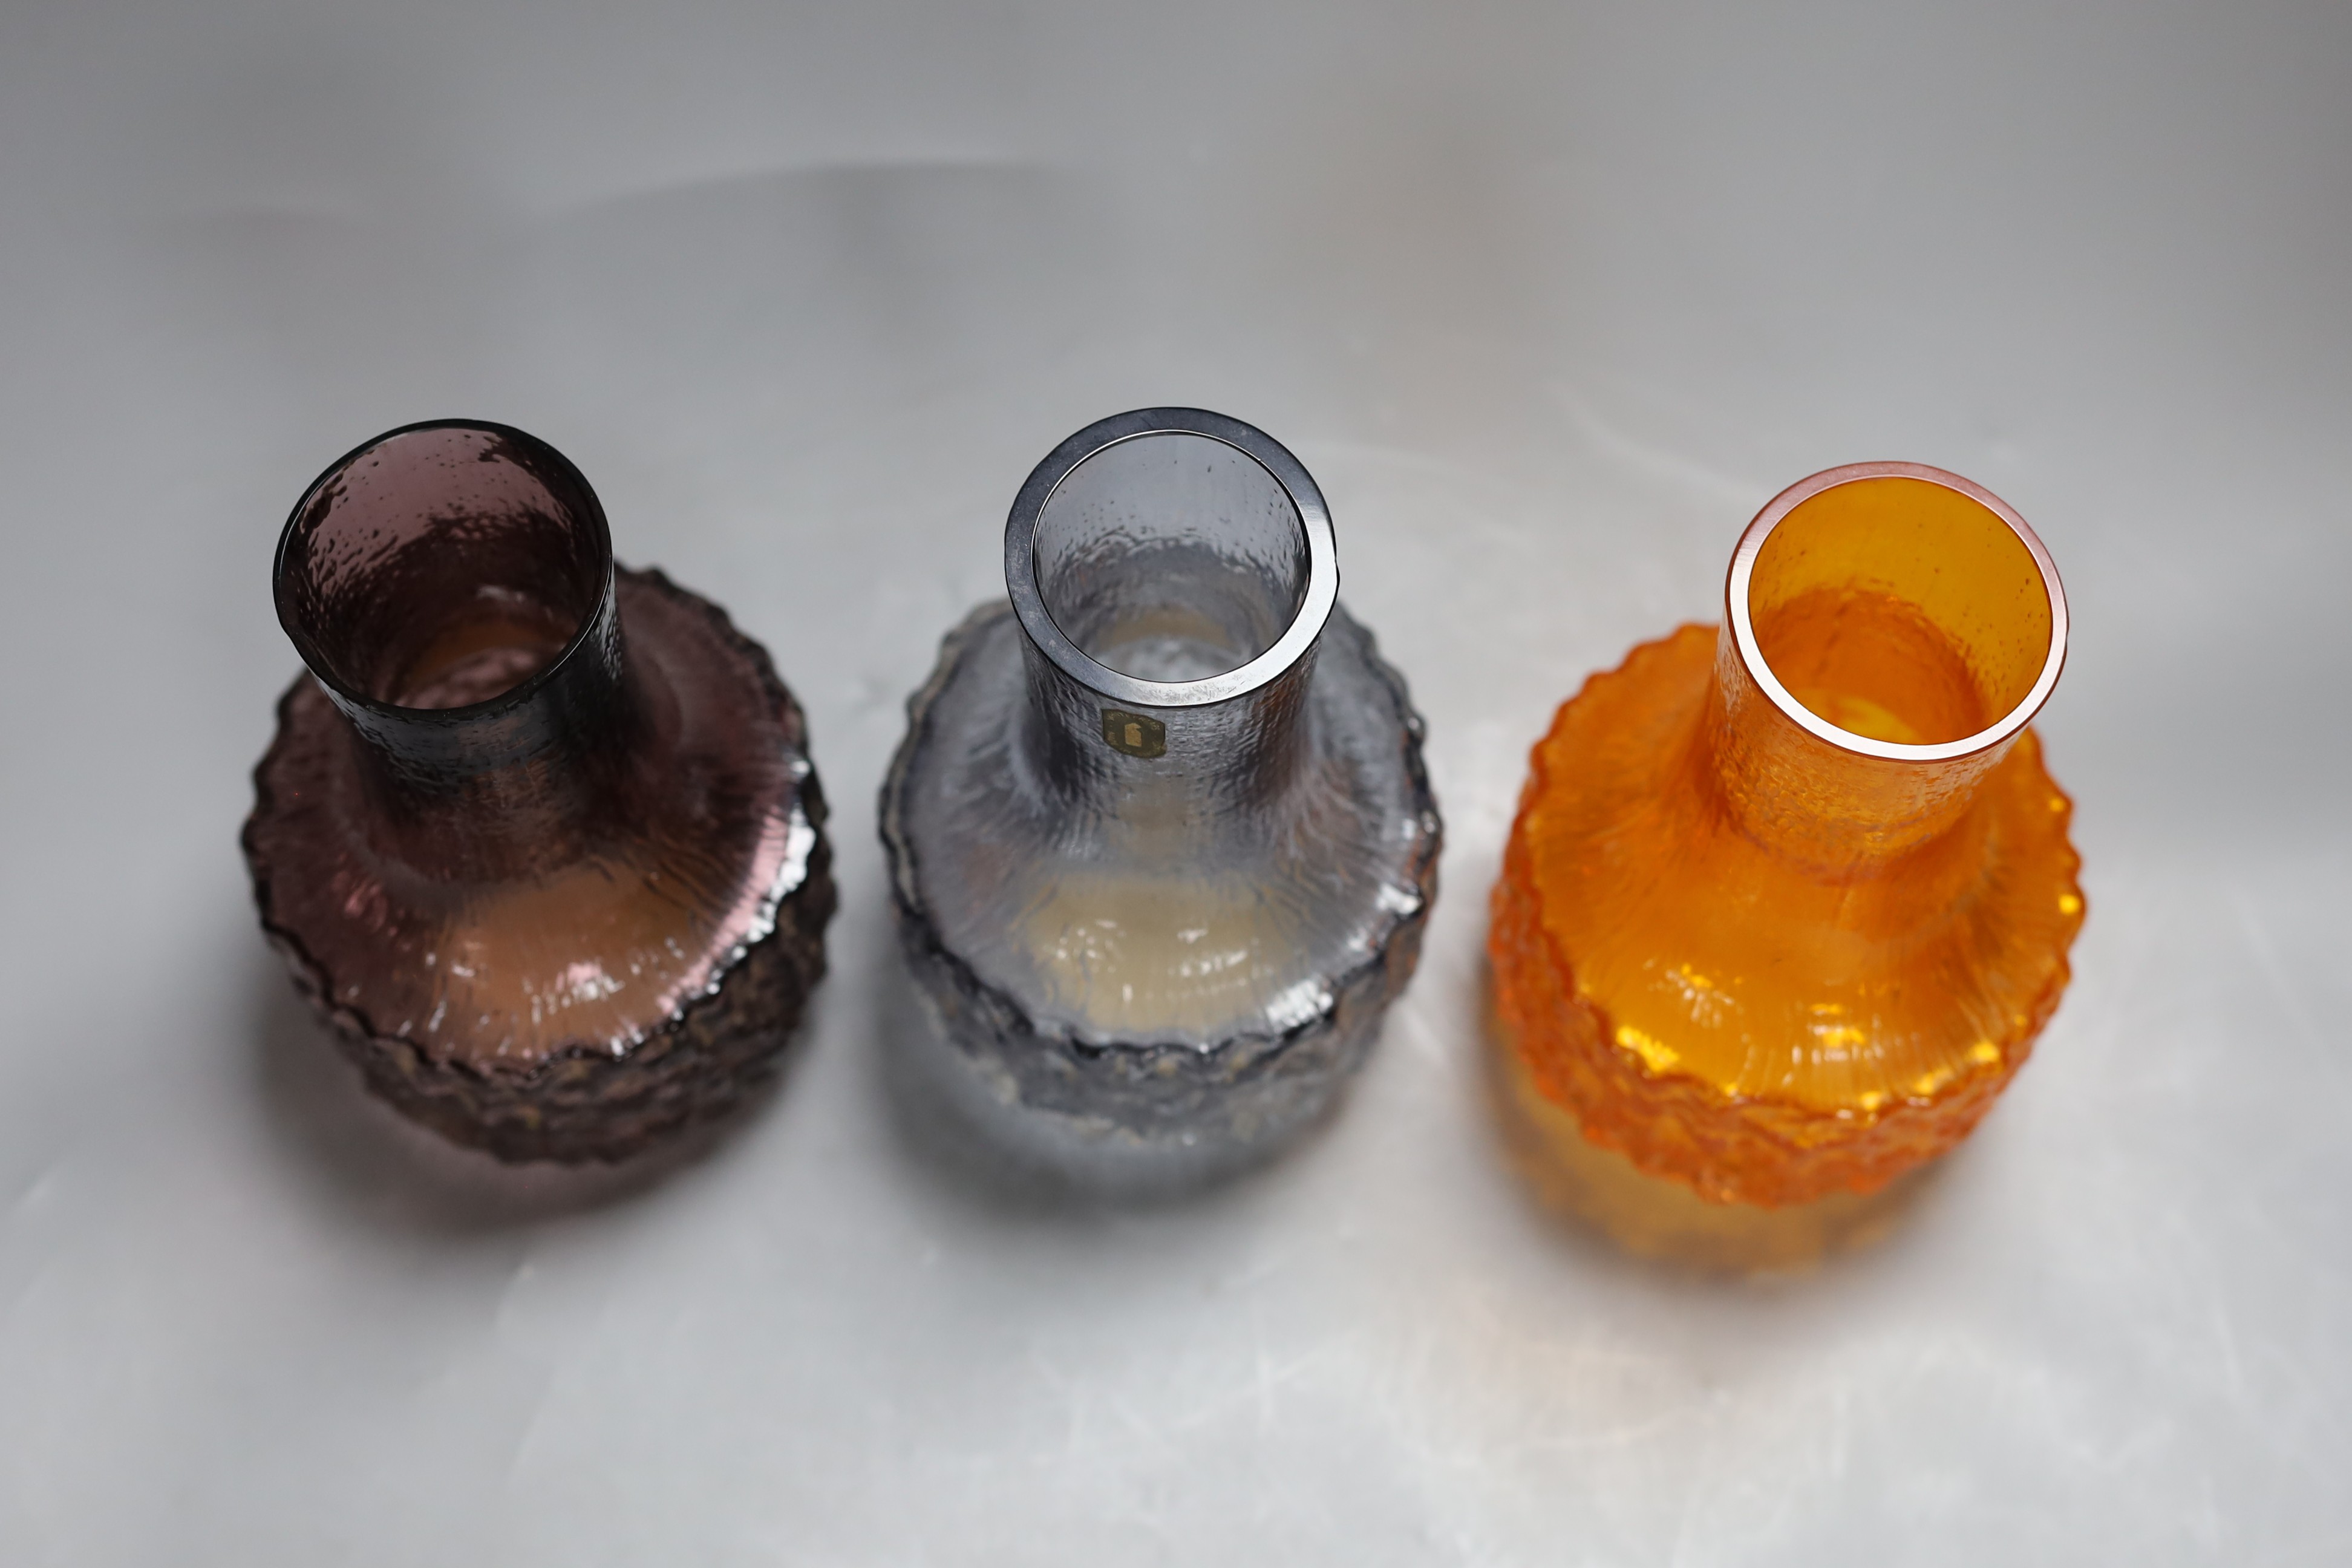 Three Whitefriars cylindrical bottle vases, in amethyst, tangerine and smoked glass, each 18cm high.